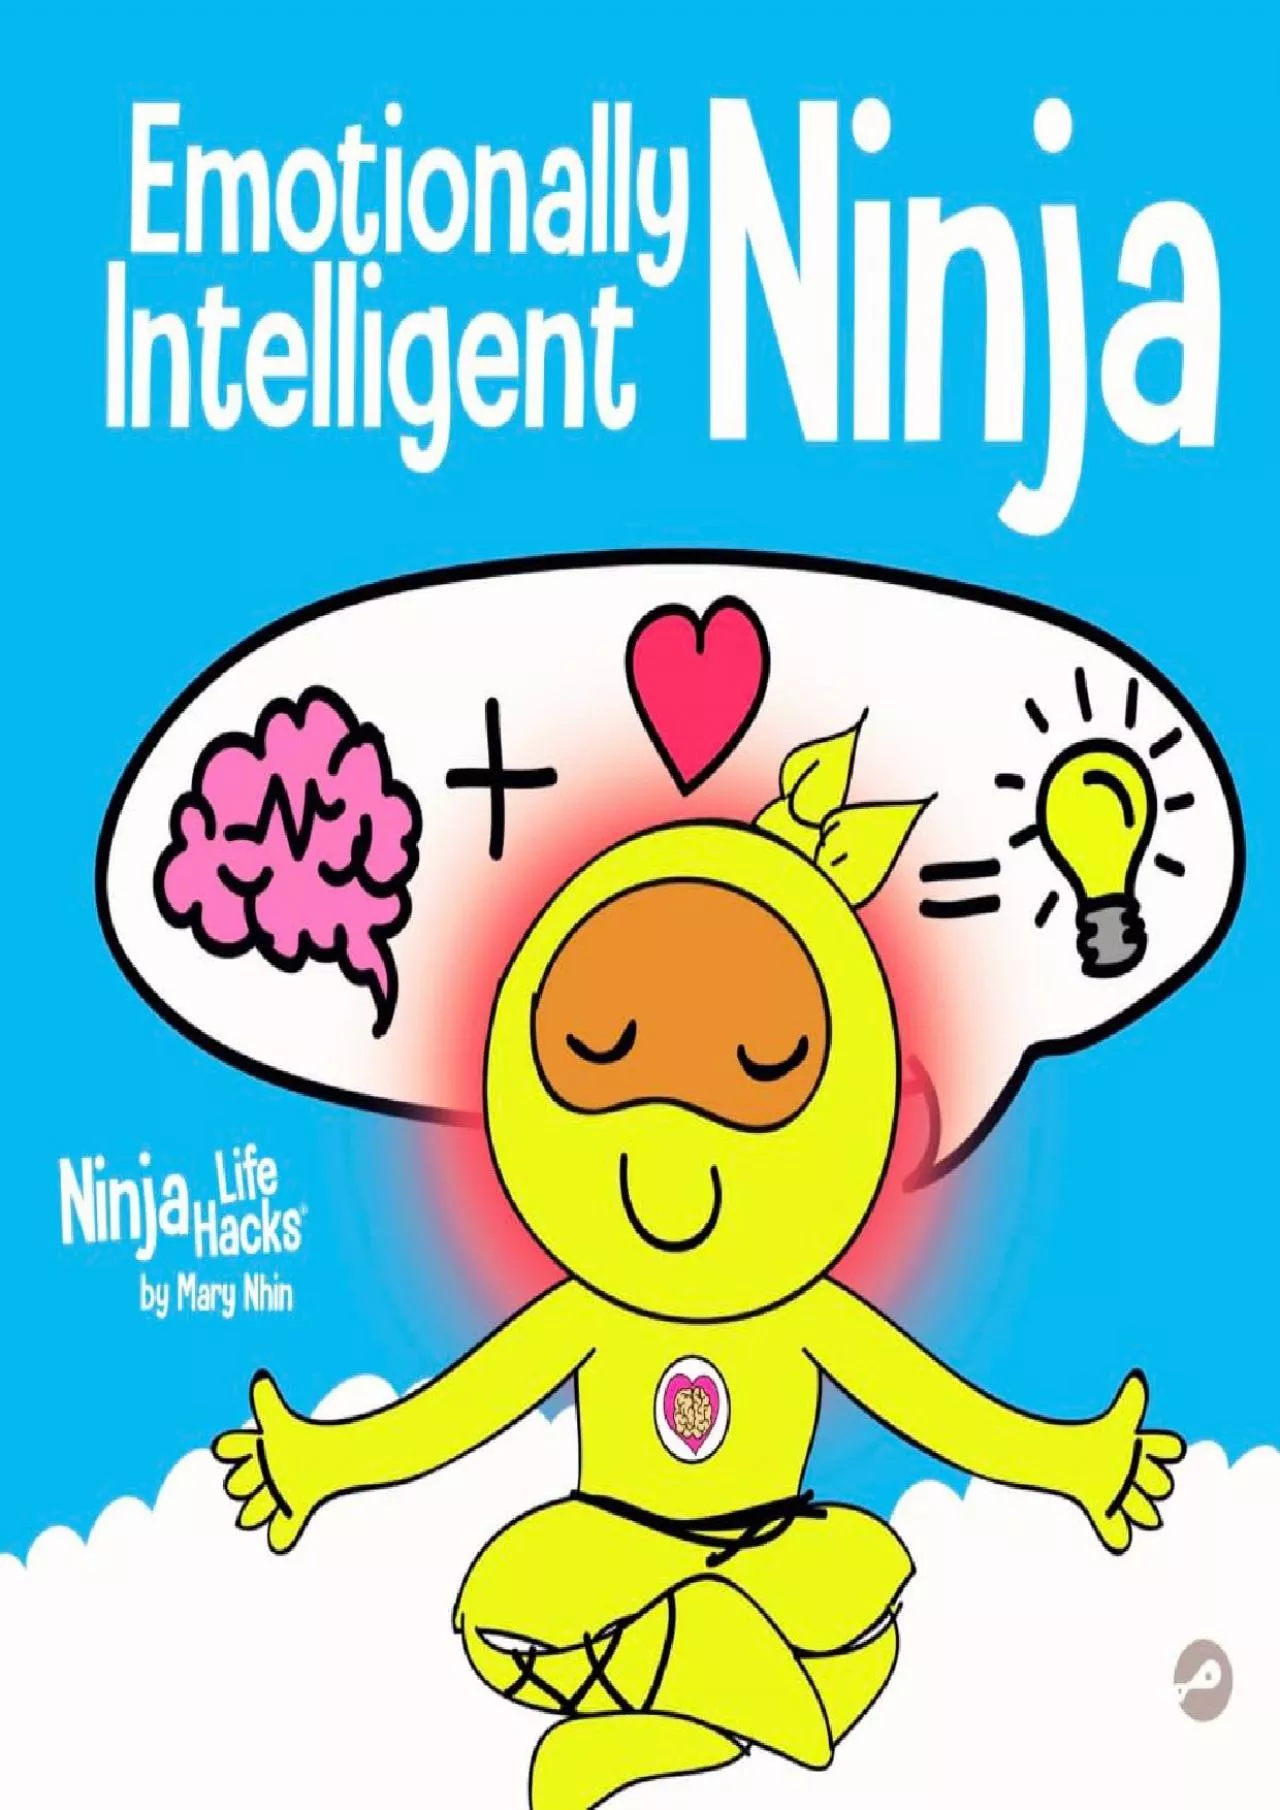 [DOWNLOAD] Emotionally Intelligent Ninja: A Childrens Book About Developing Emotional